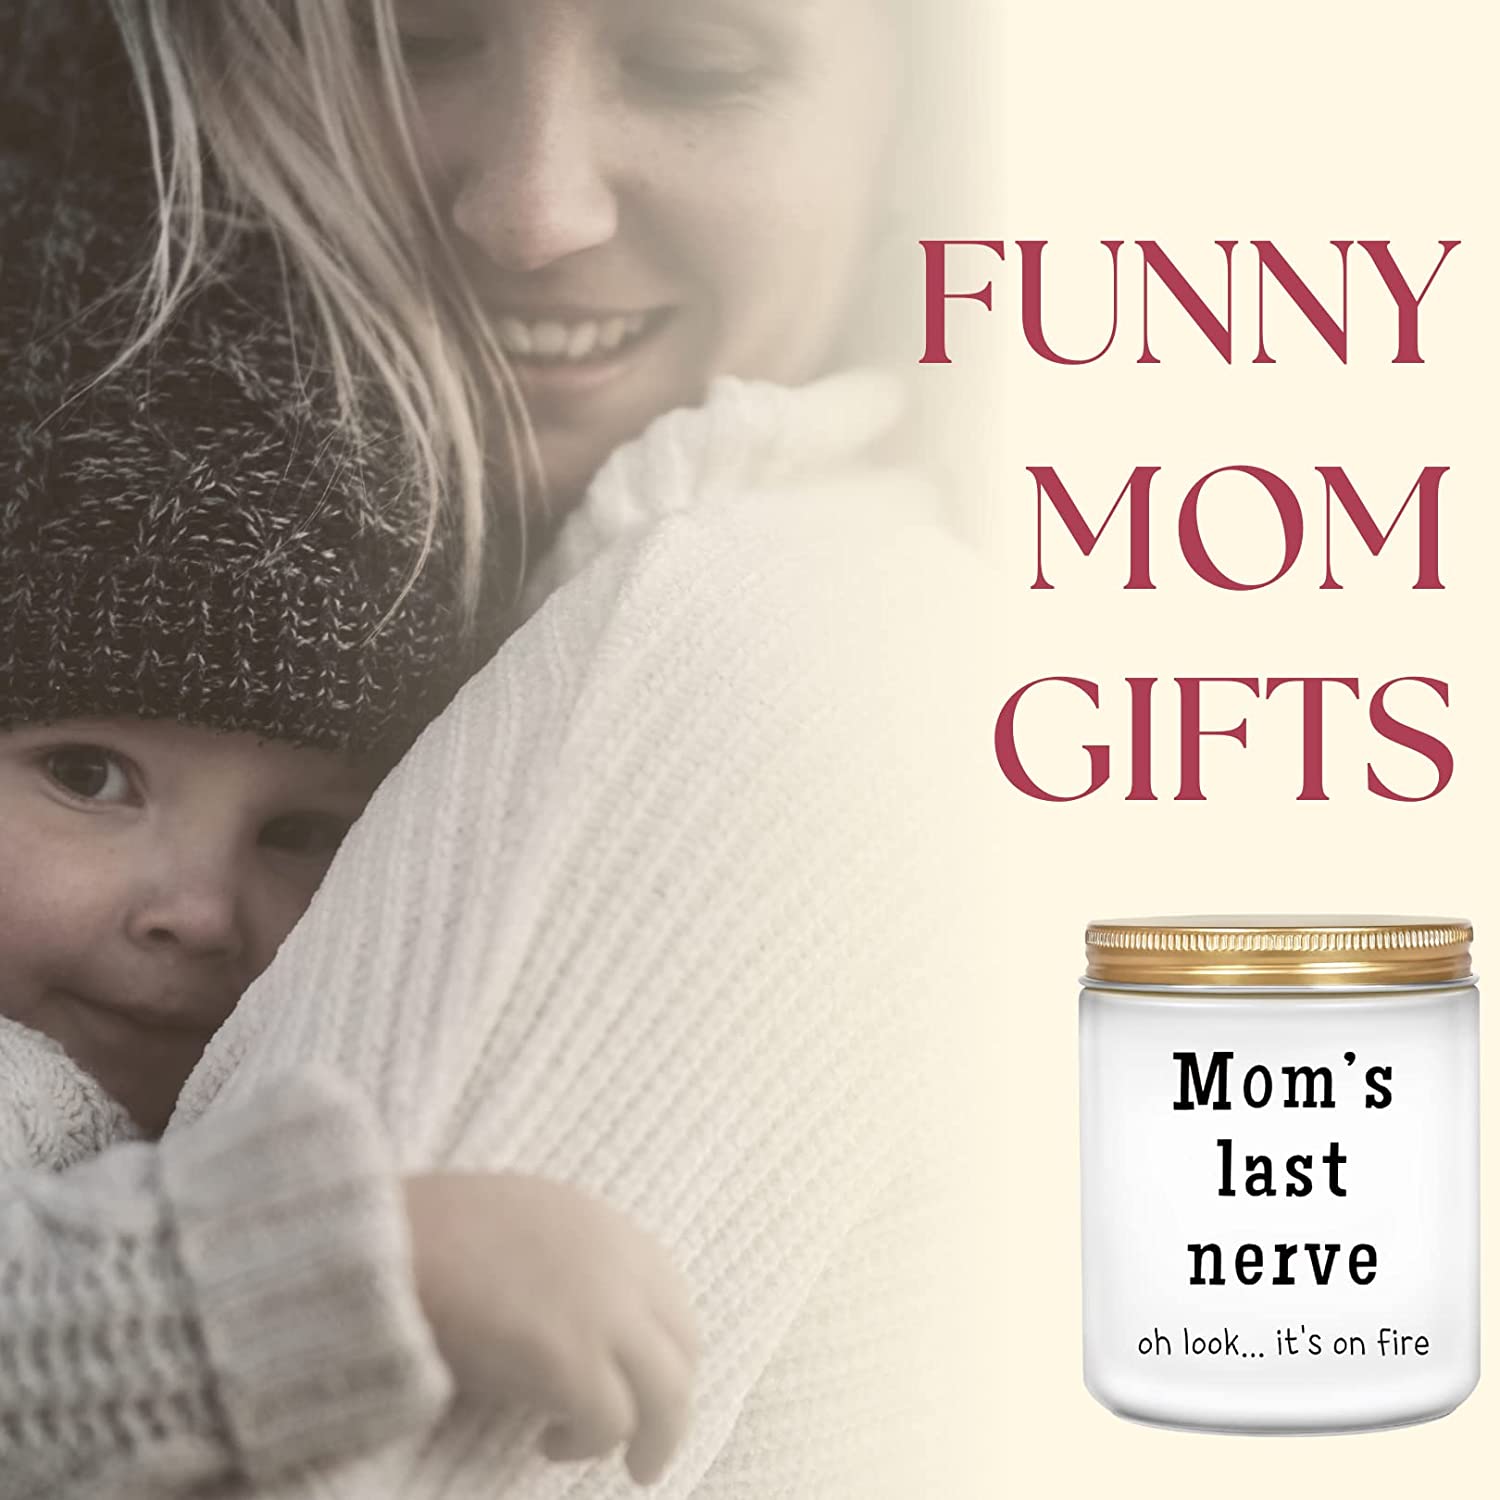 Don't let mom's last nerve get the best of her! –